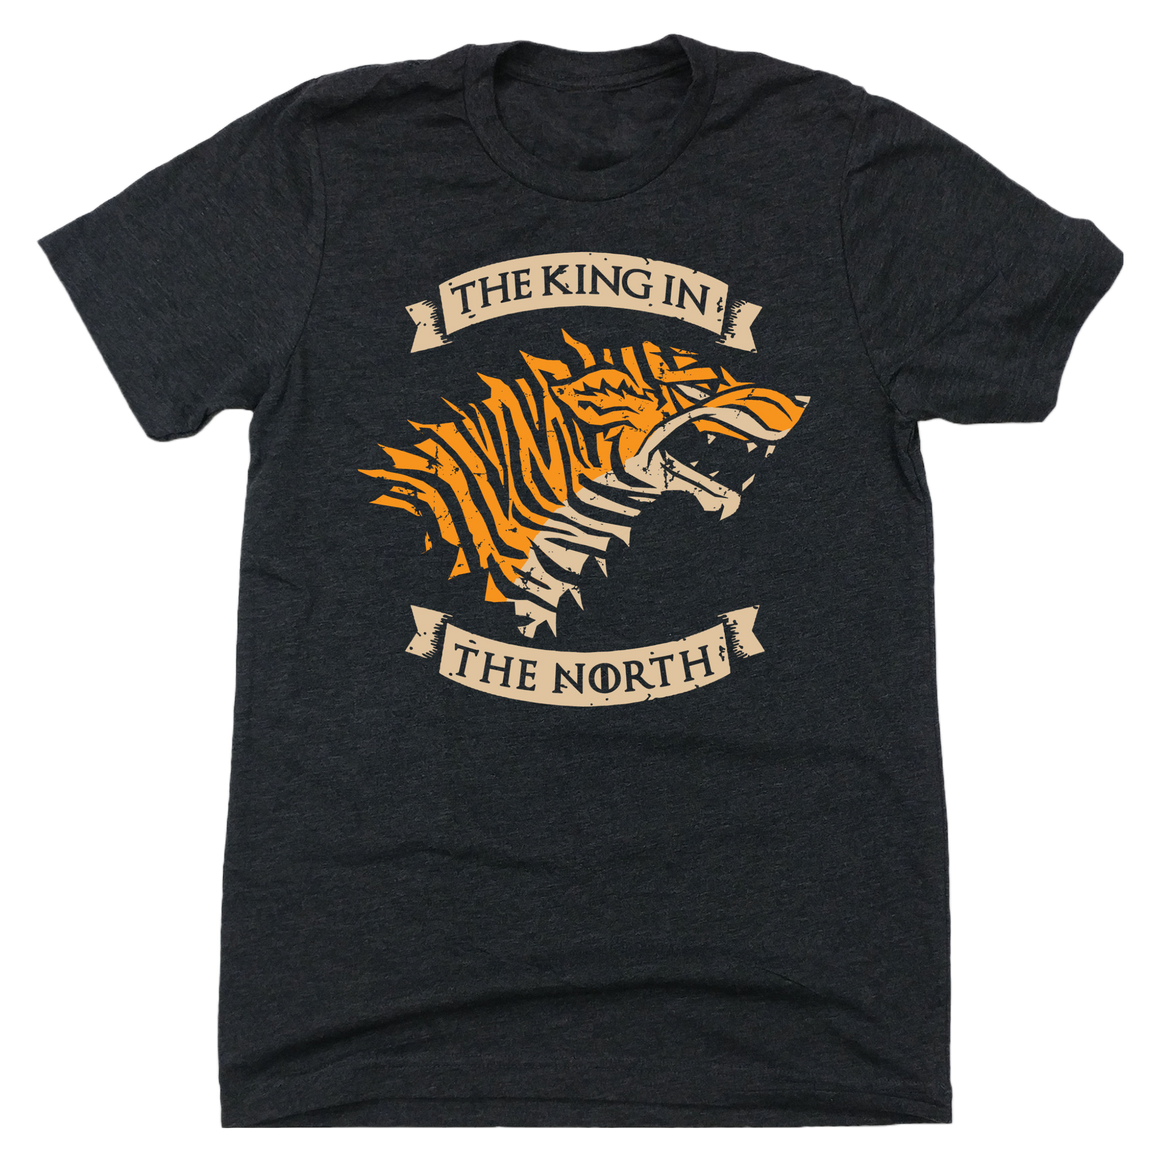 The King in the North - Cincy Shirts